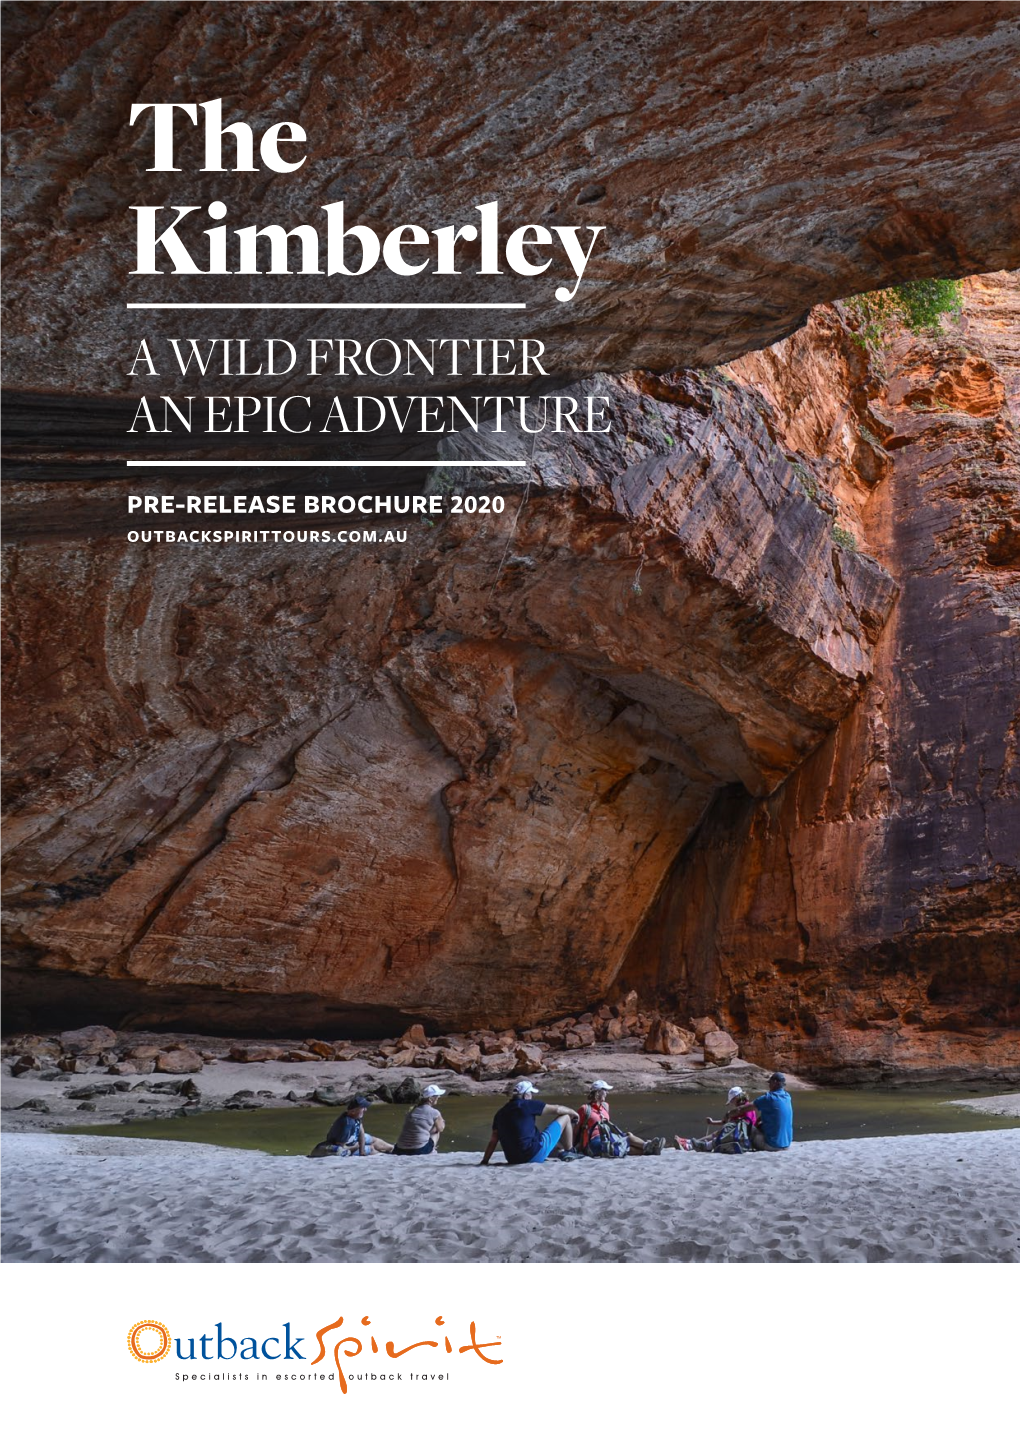 The Kimberley a WILD FRONTIER an EPIC ADVENTURE